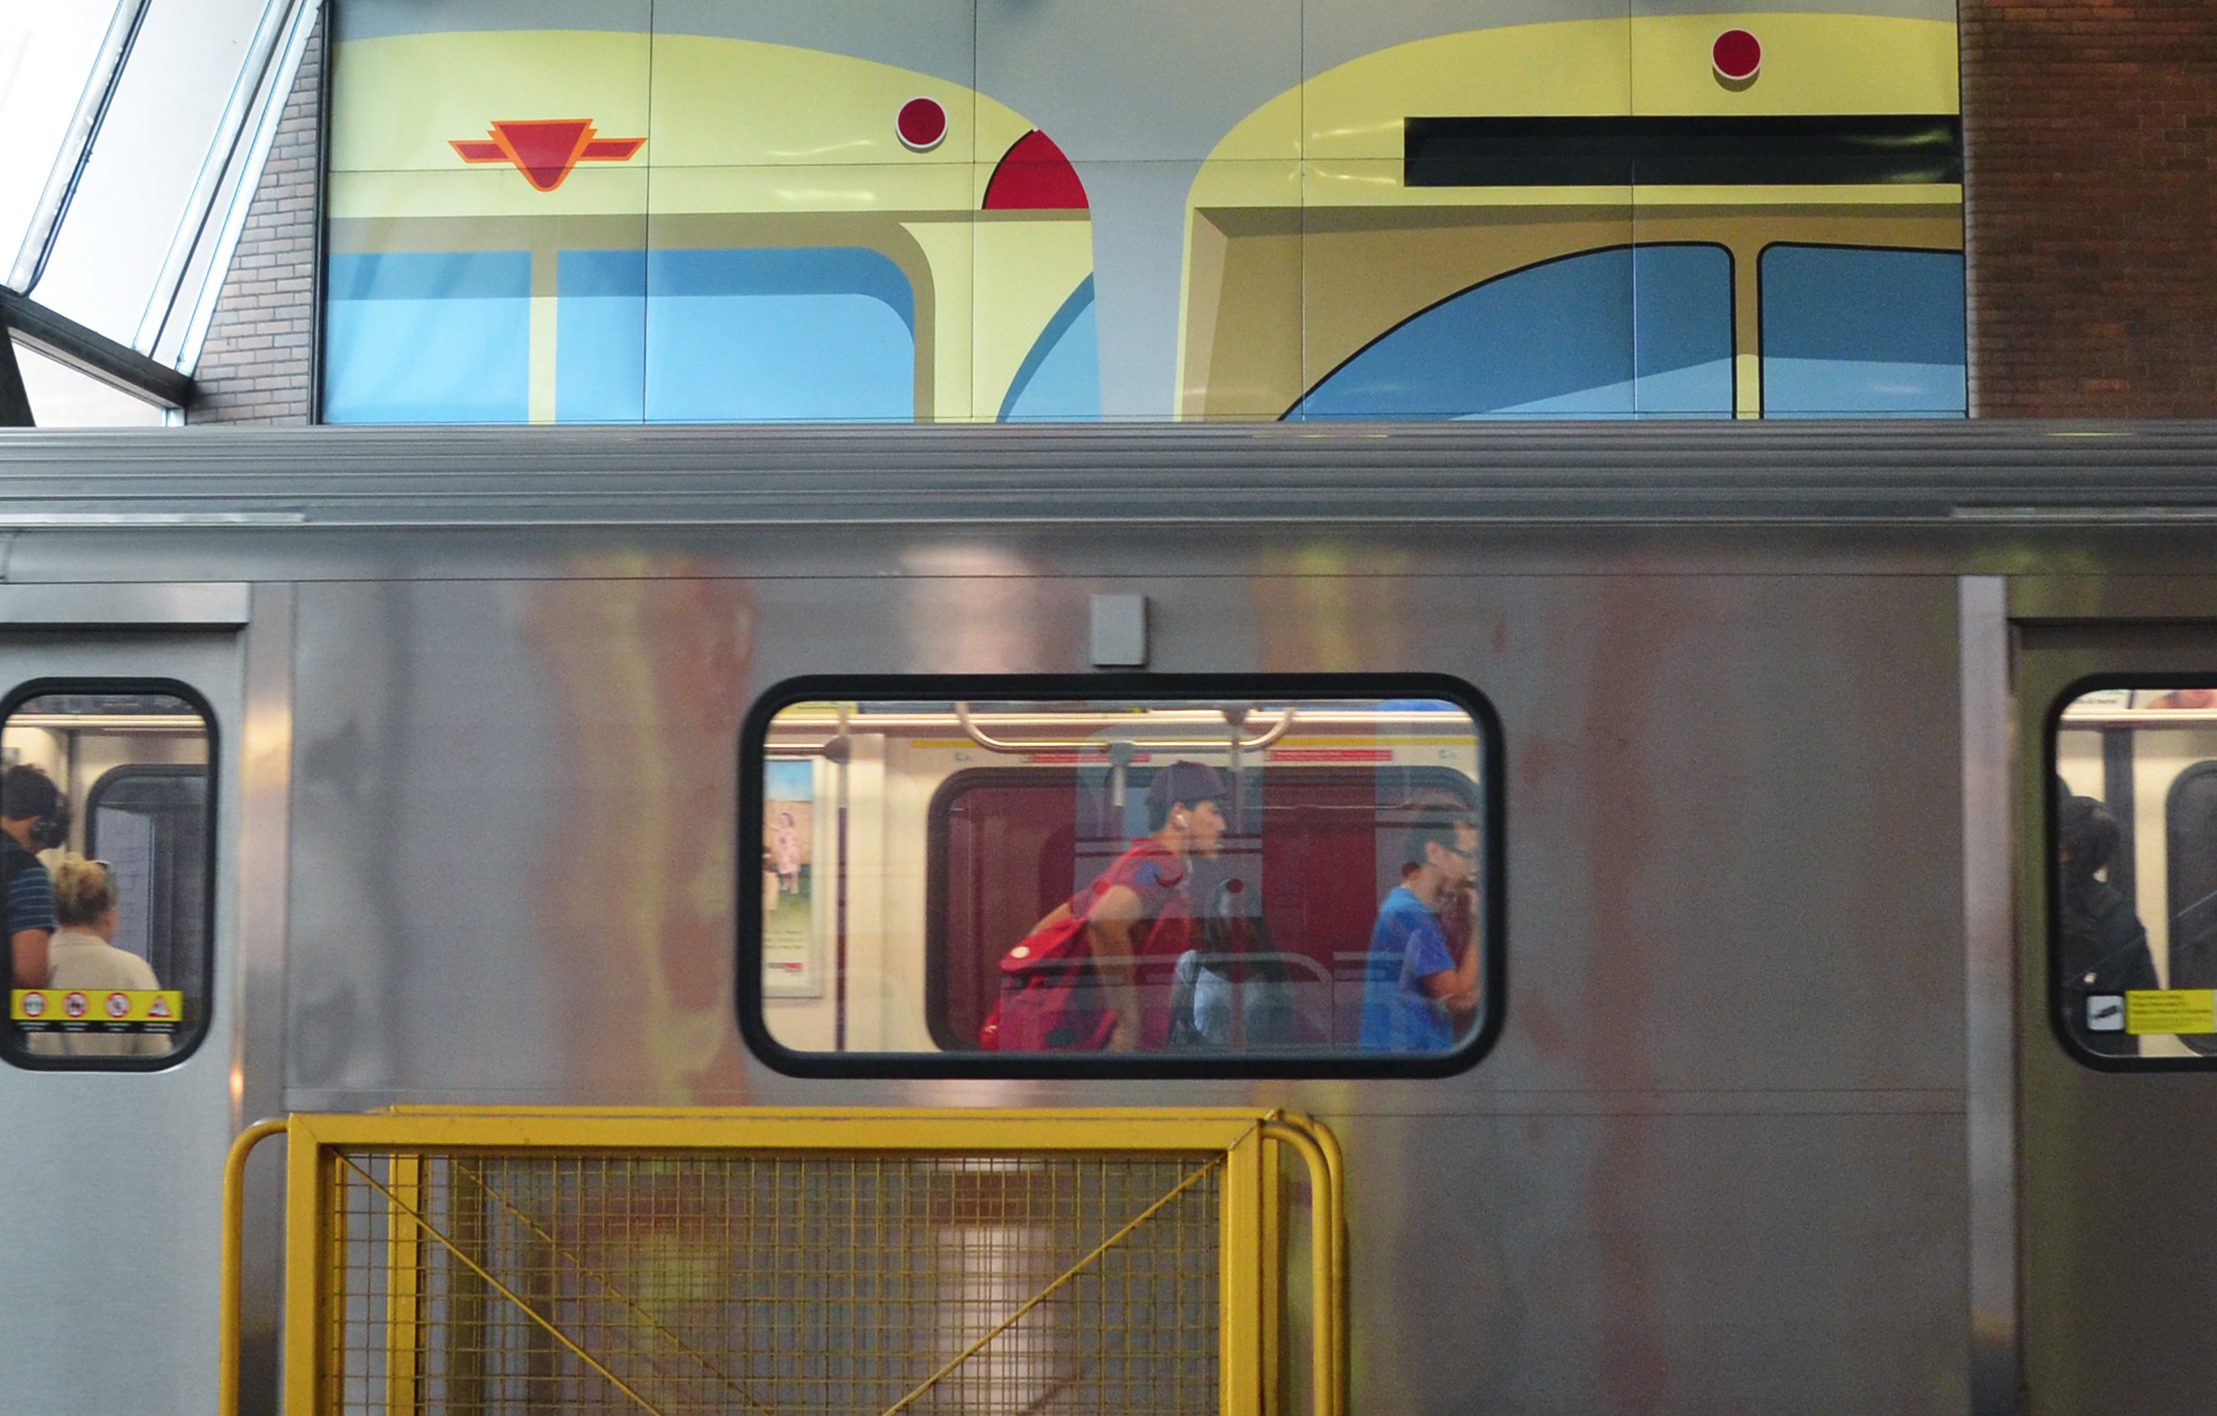 view of a subway car from the side with people in the window.  The subway is in Eglinton West station and part of the artwork by Gerald Zeldin, stylized pictures of subway cars, is on the wall behind the real subway car 